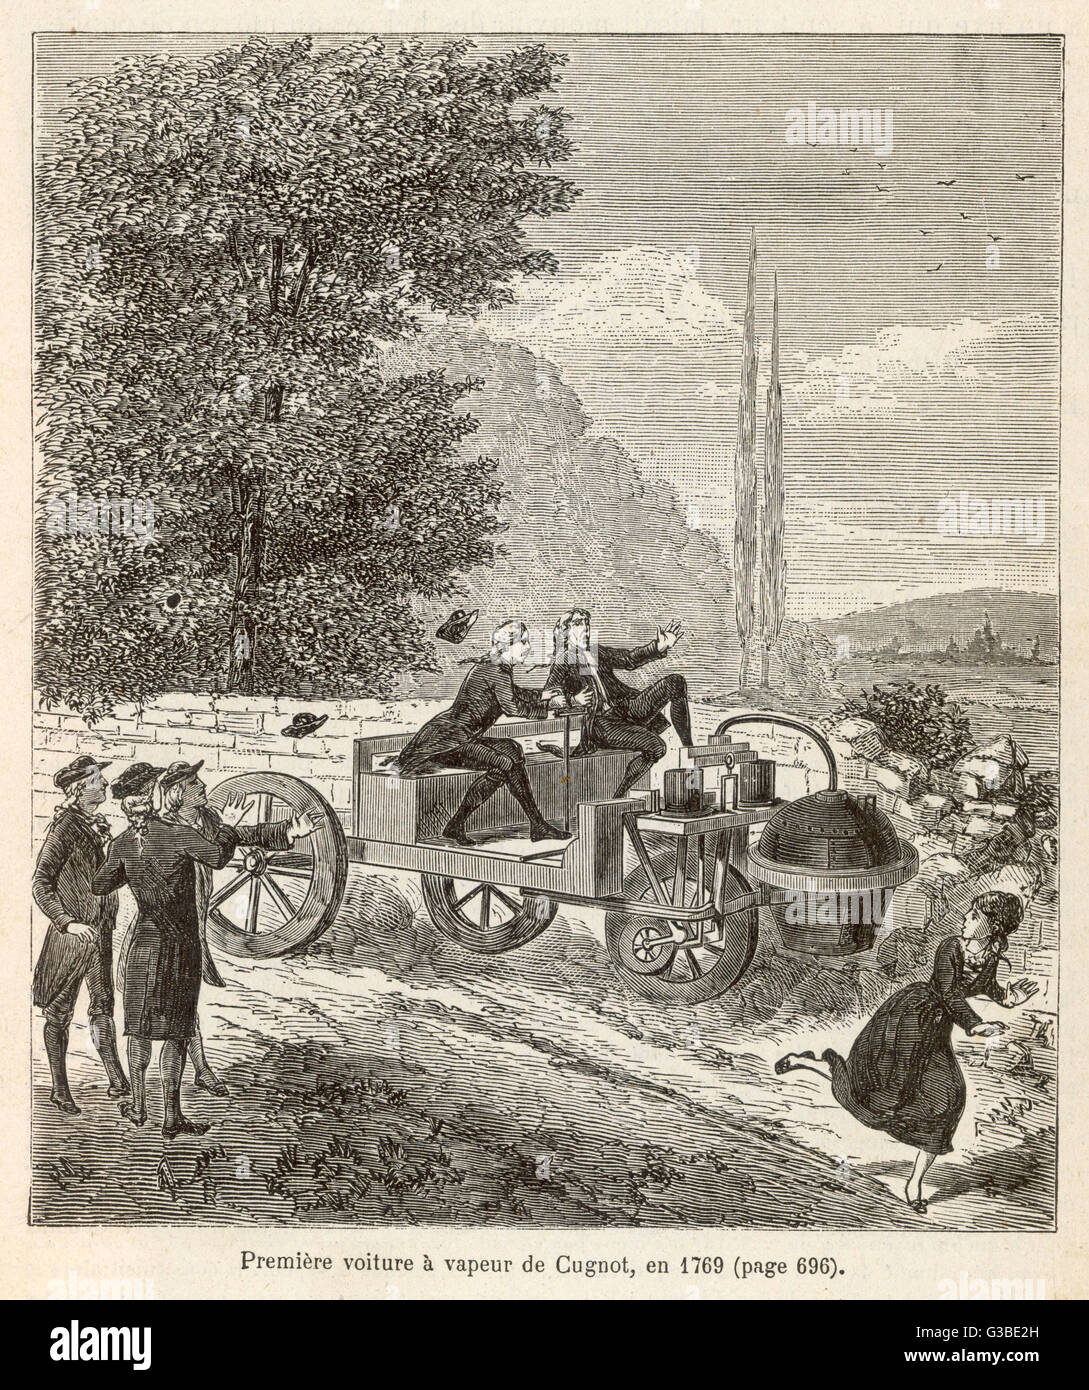 Cugnot's first steam carriage  causes alarm when he takes it  on a trial trip.    1769 Stock Photo